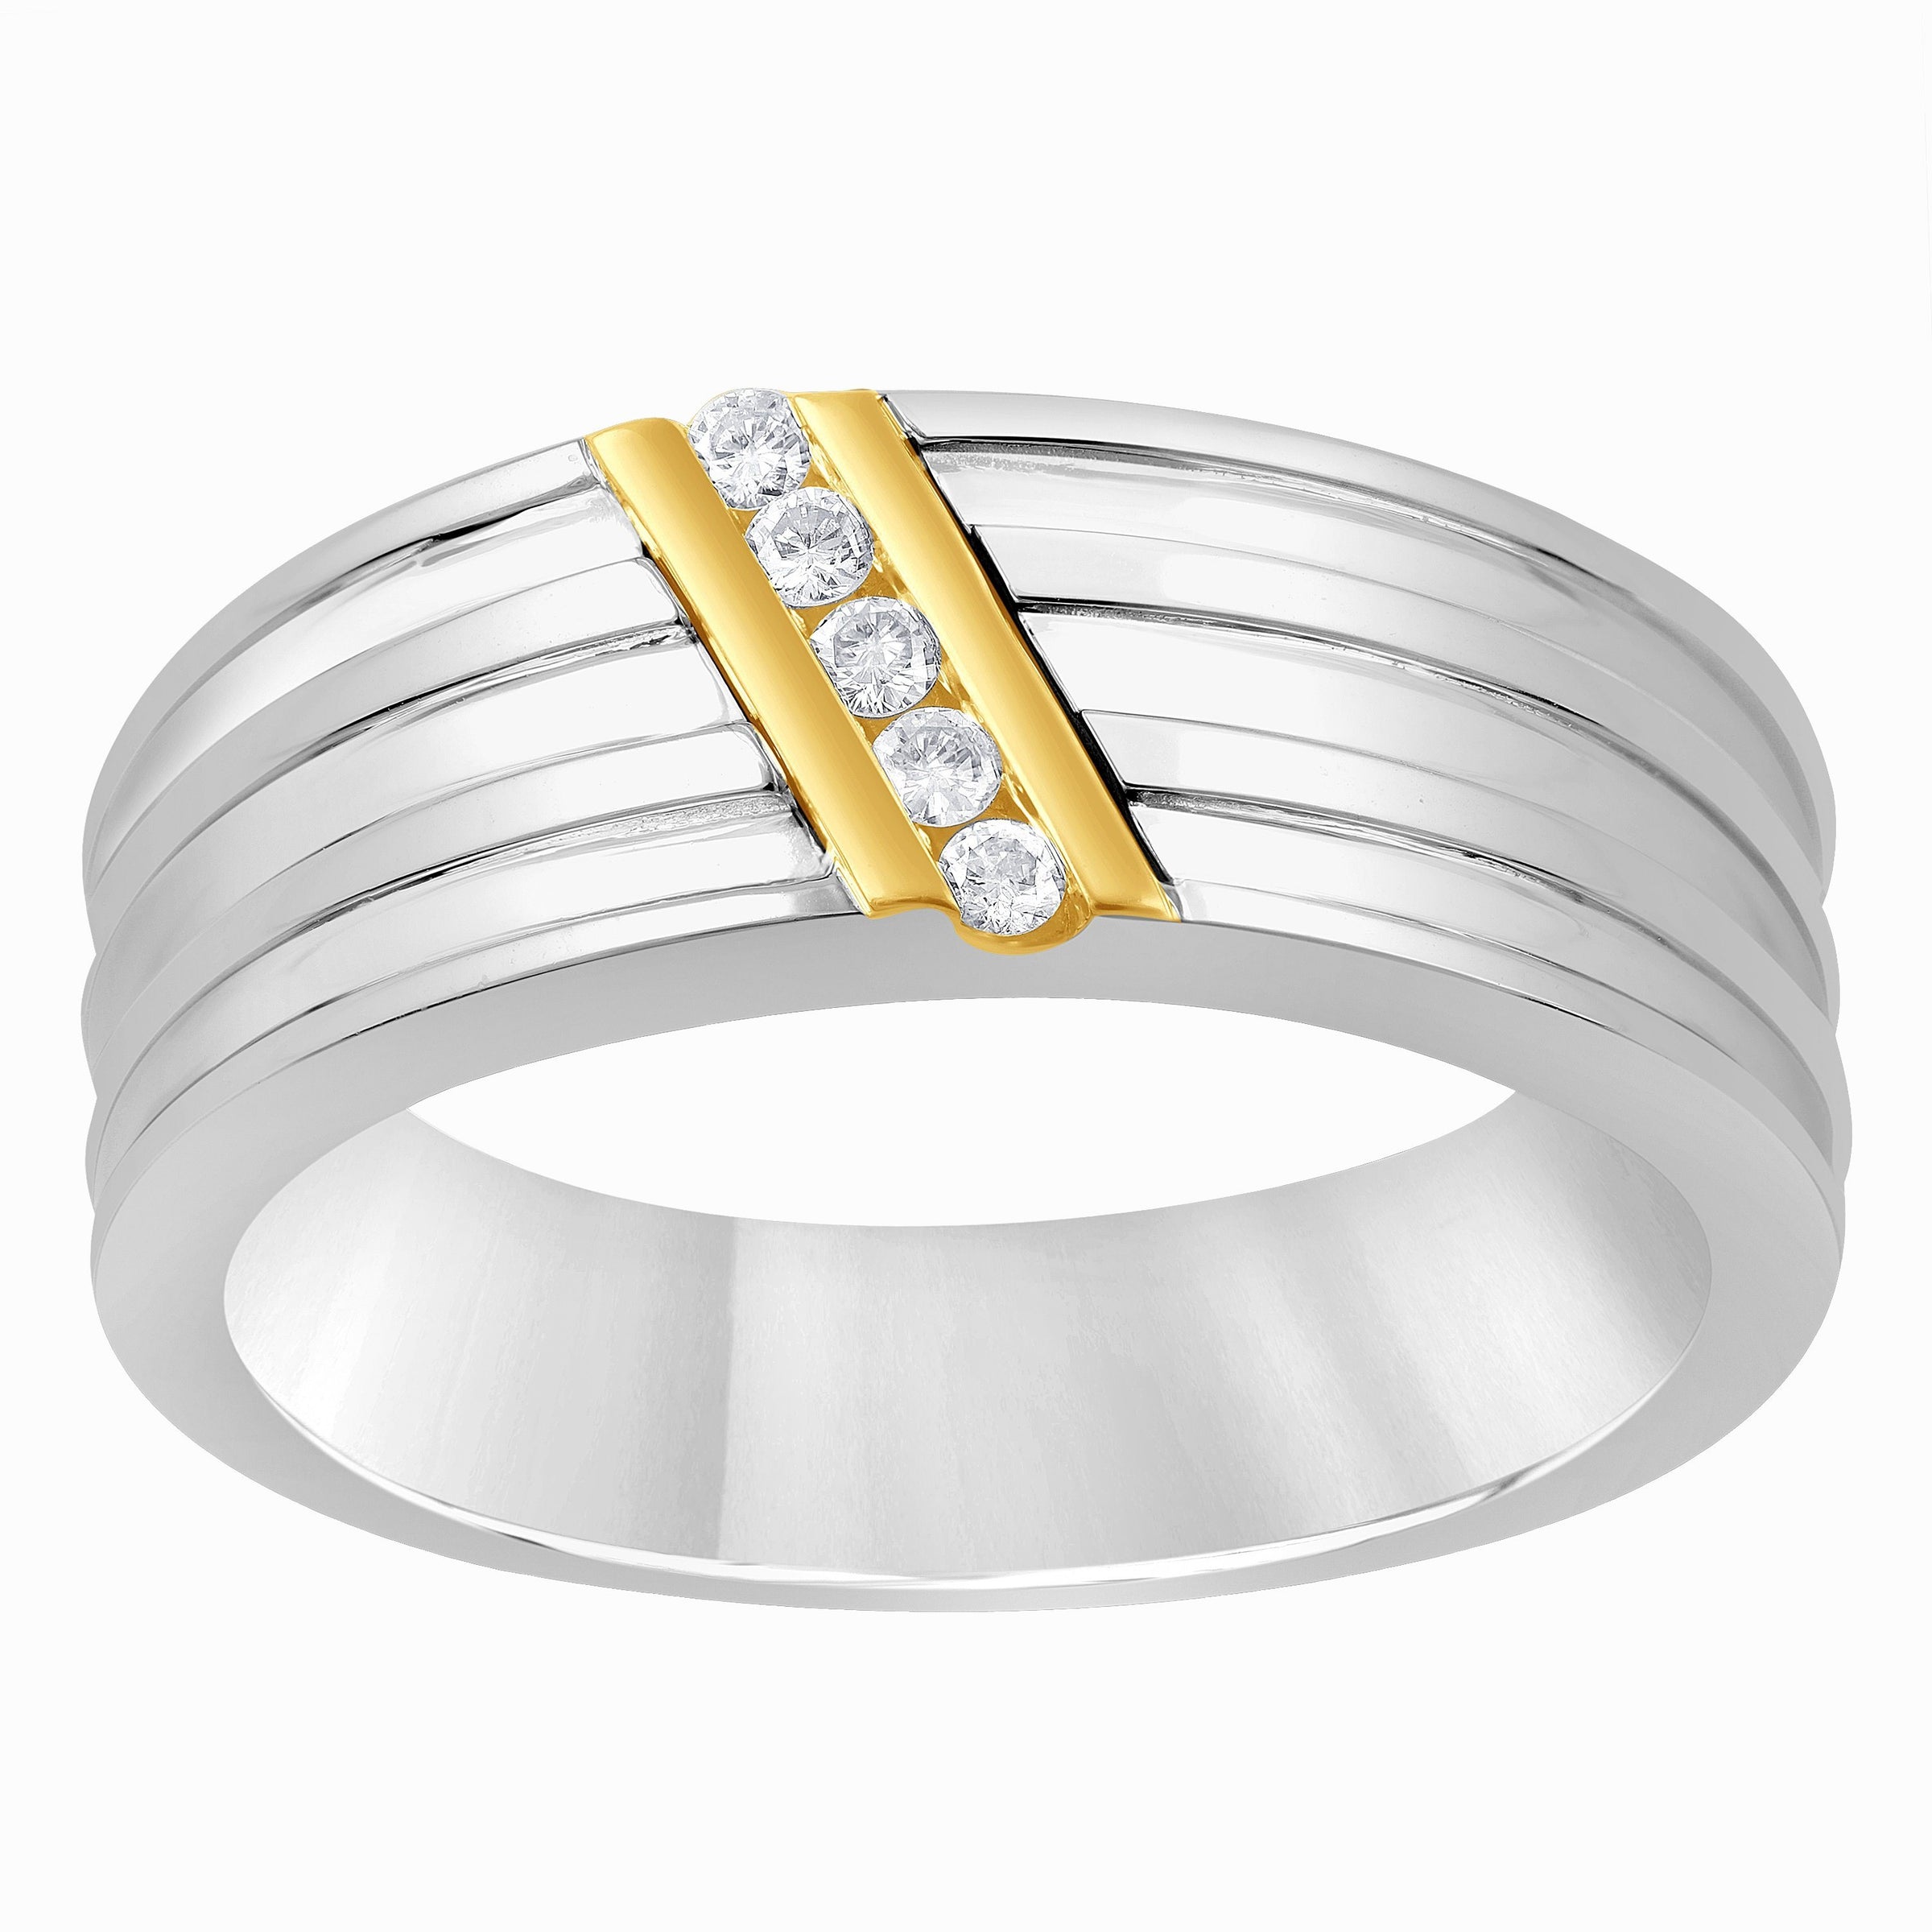 Mirage Channel Men's Ring with 0.10ct of Diamonds in Sterling Silver and 9ct Yellow Gold Rings Bevilles 